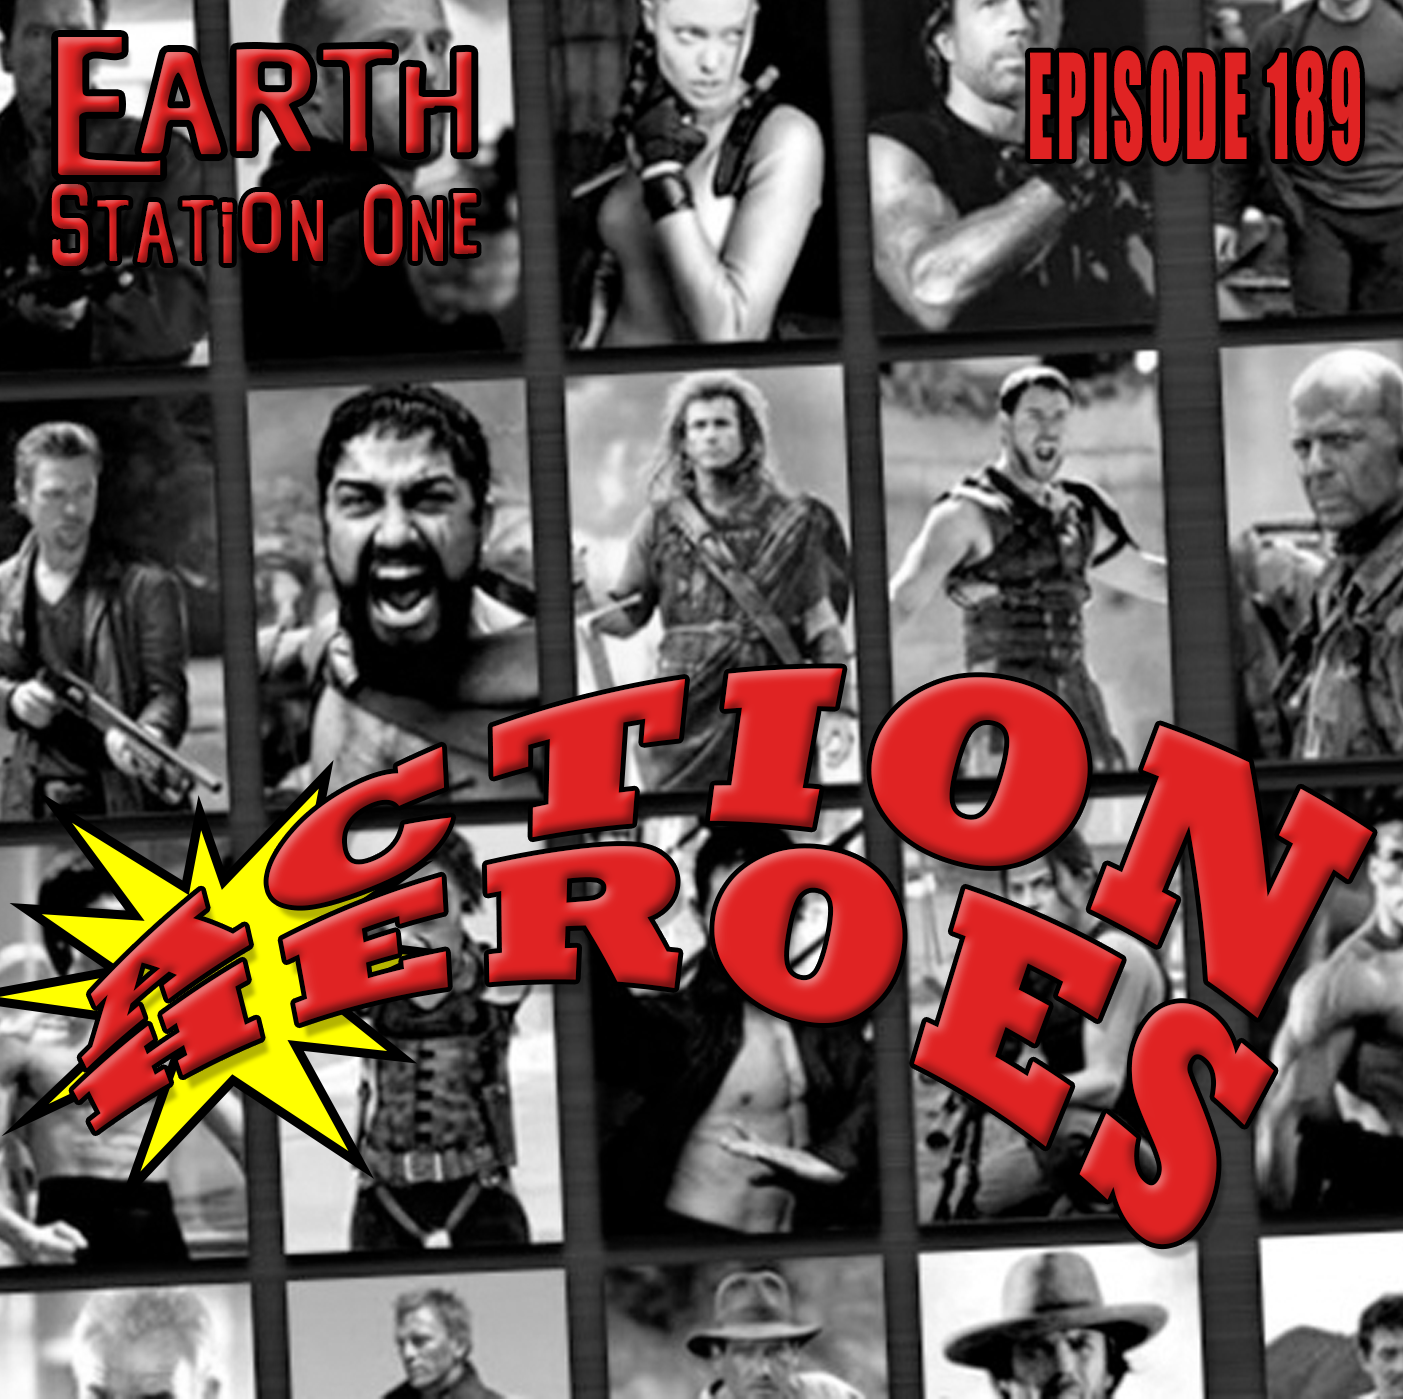 Earth Station One Ep 189